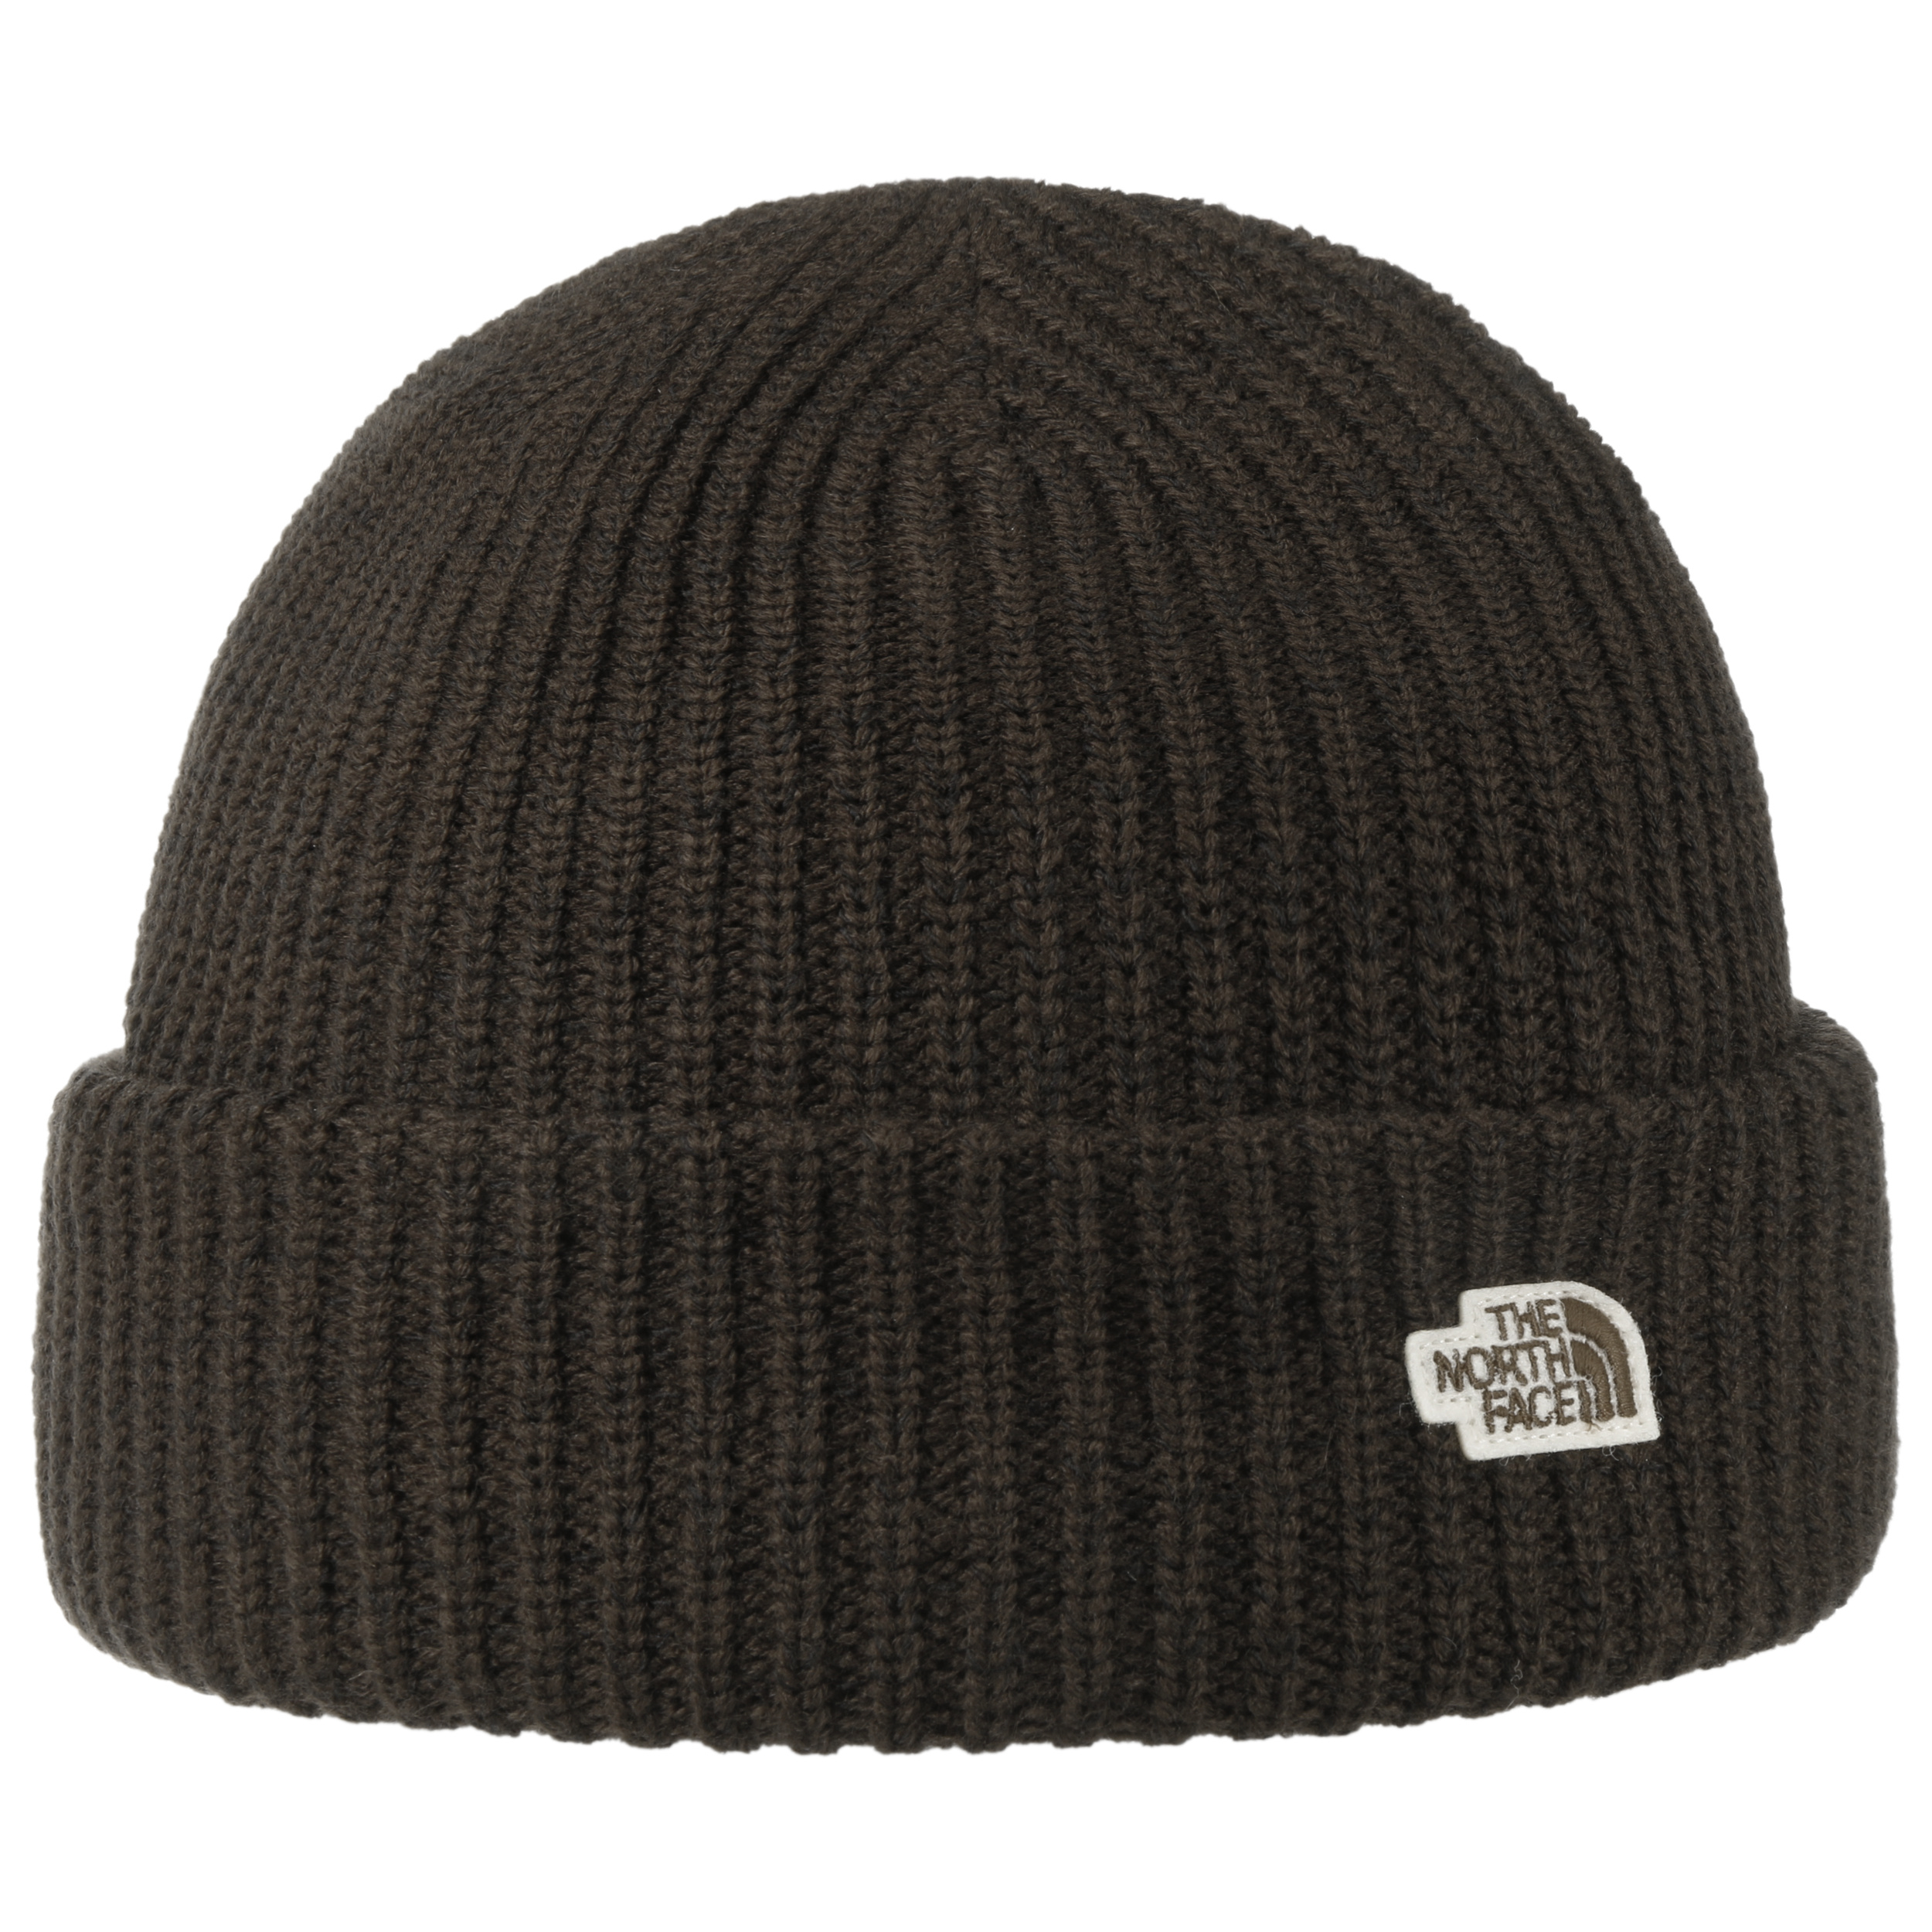 Hearing impaired two weeks Clerk Classic Salty Dog Beanie Hat by The North Face - 42,95 €